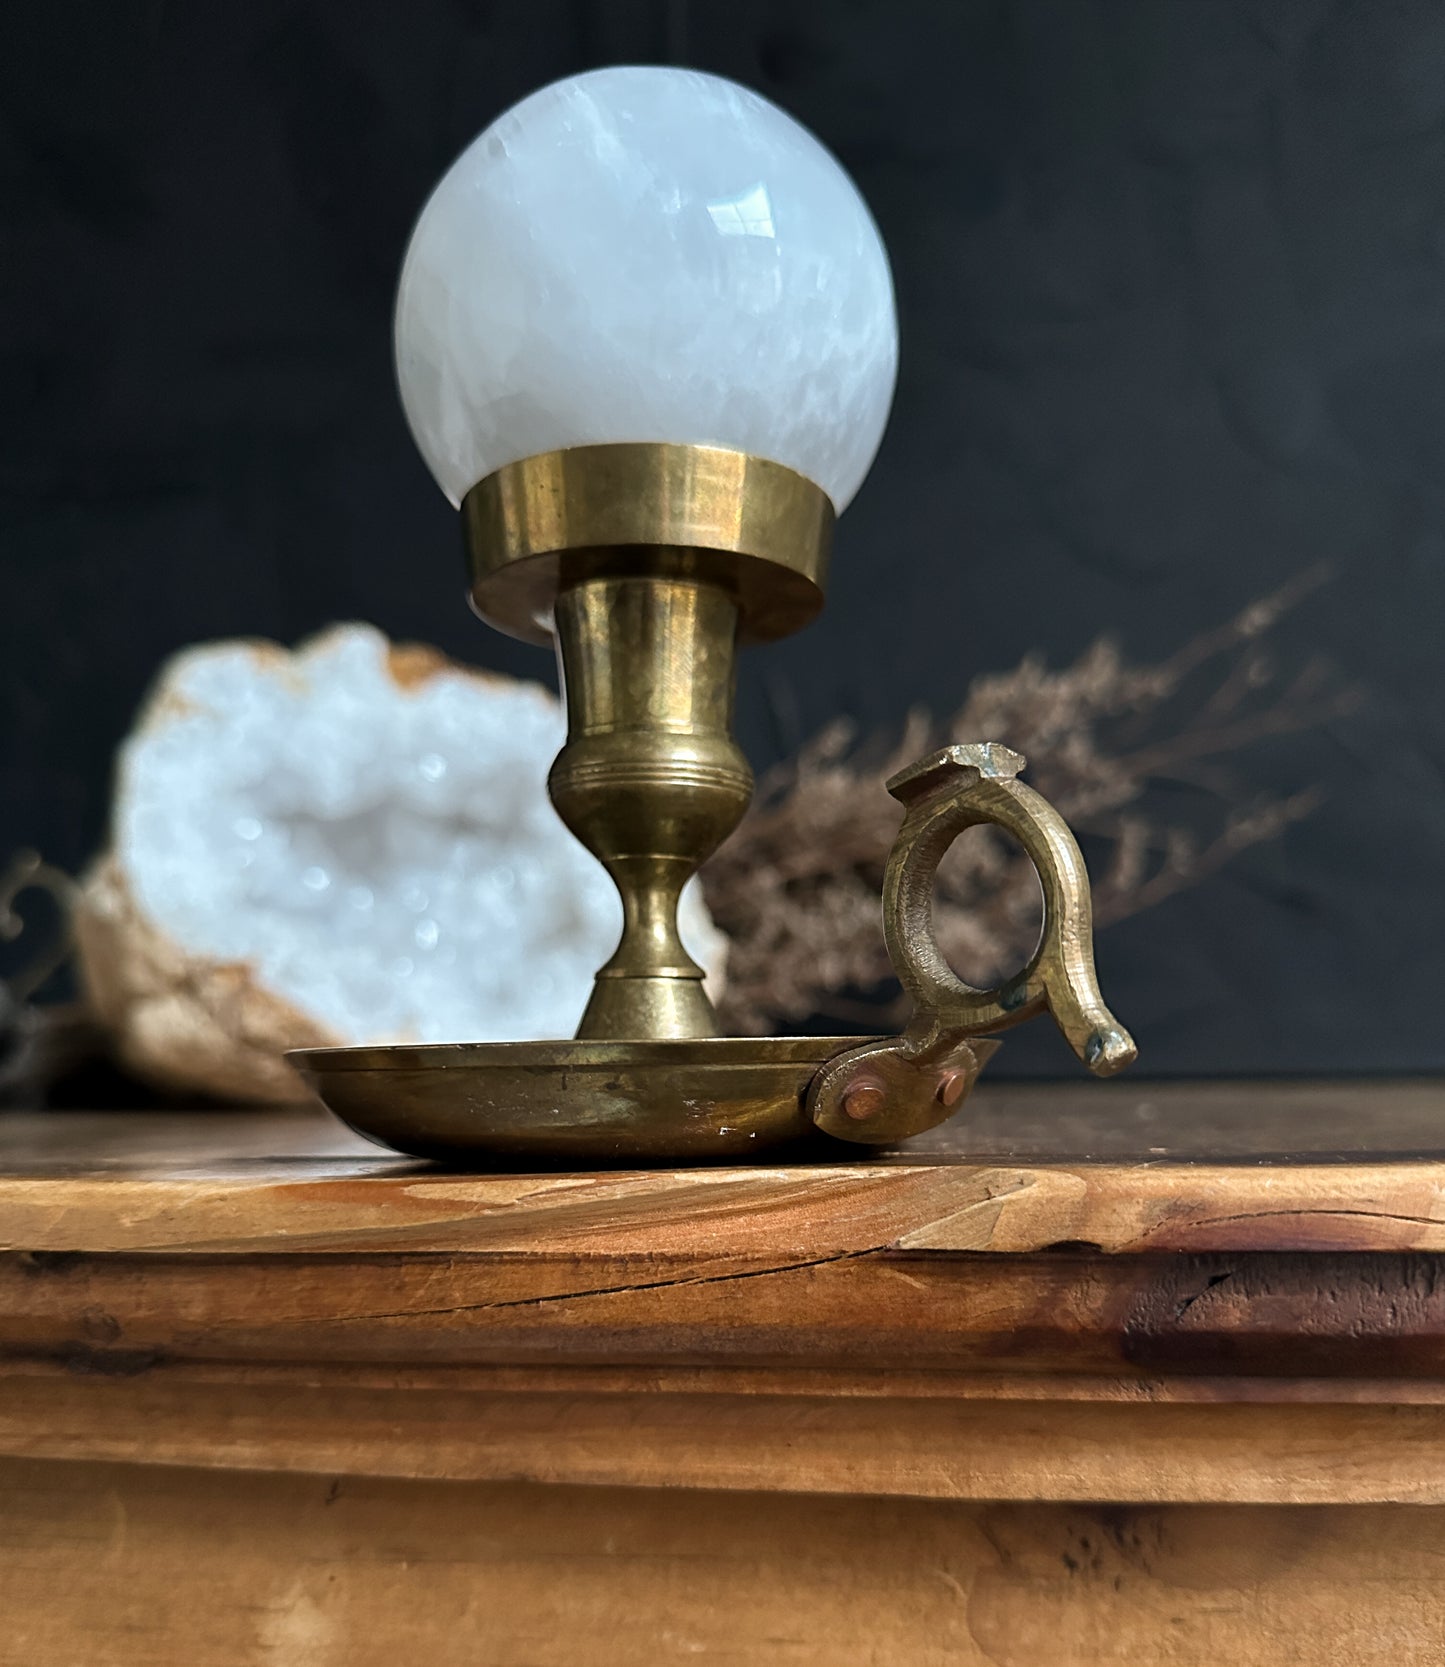 Vintage Brass Candle Holder with Selenite Sphere